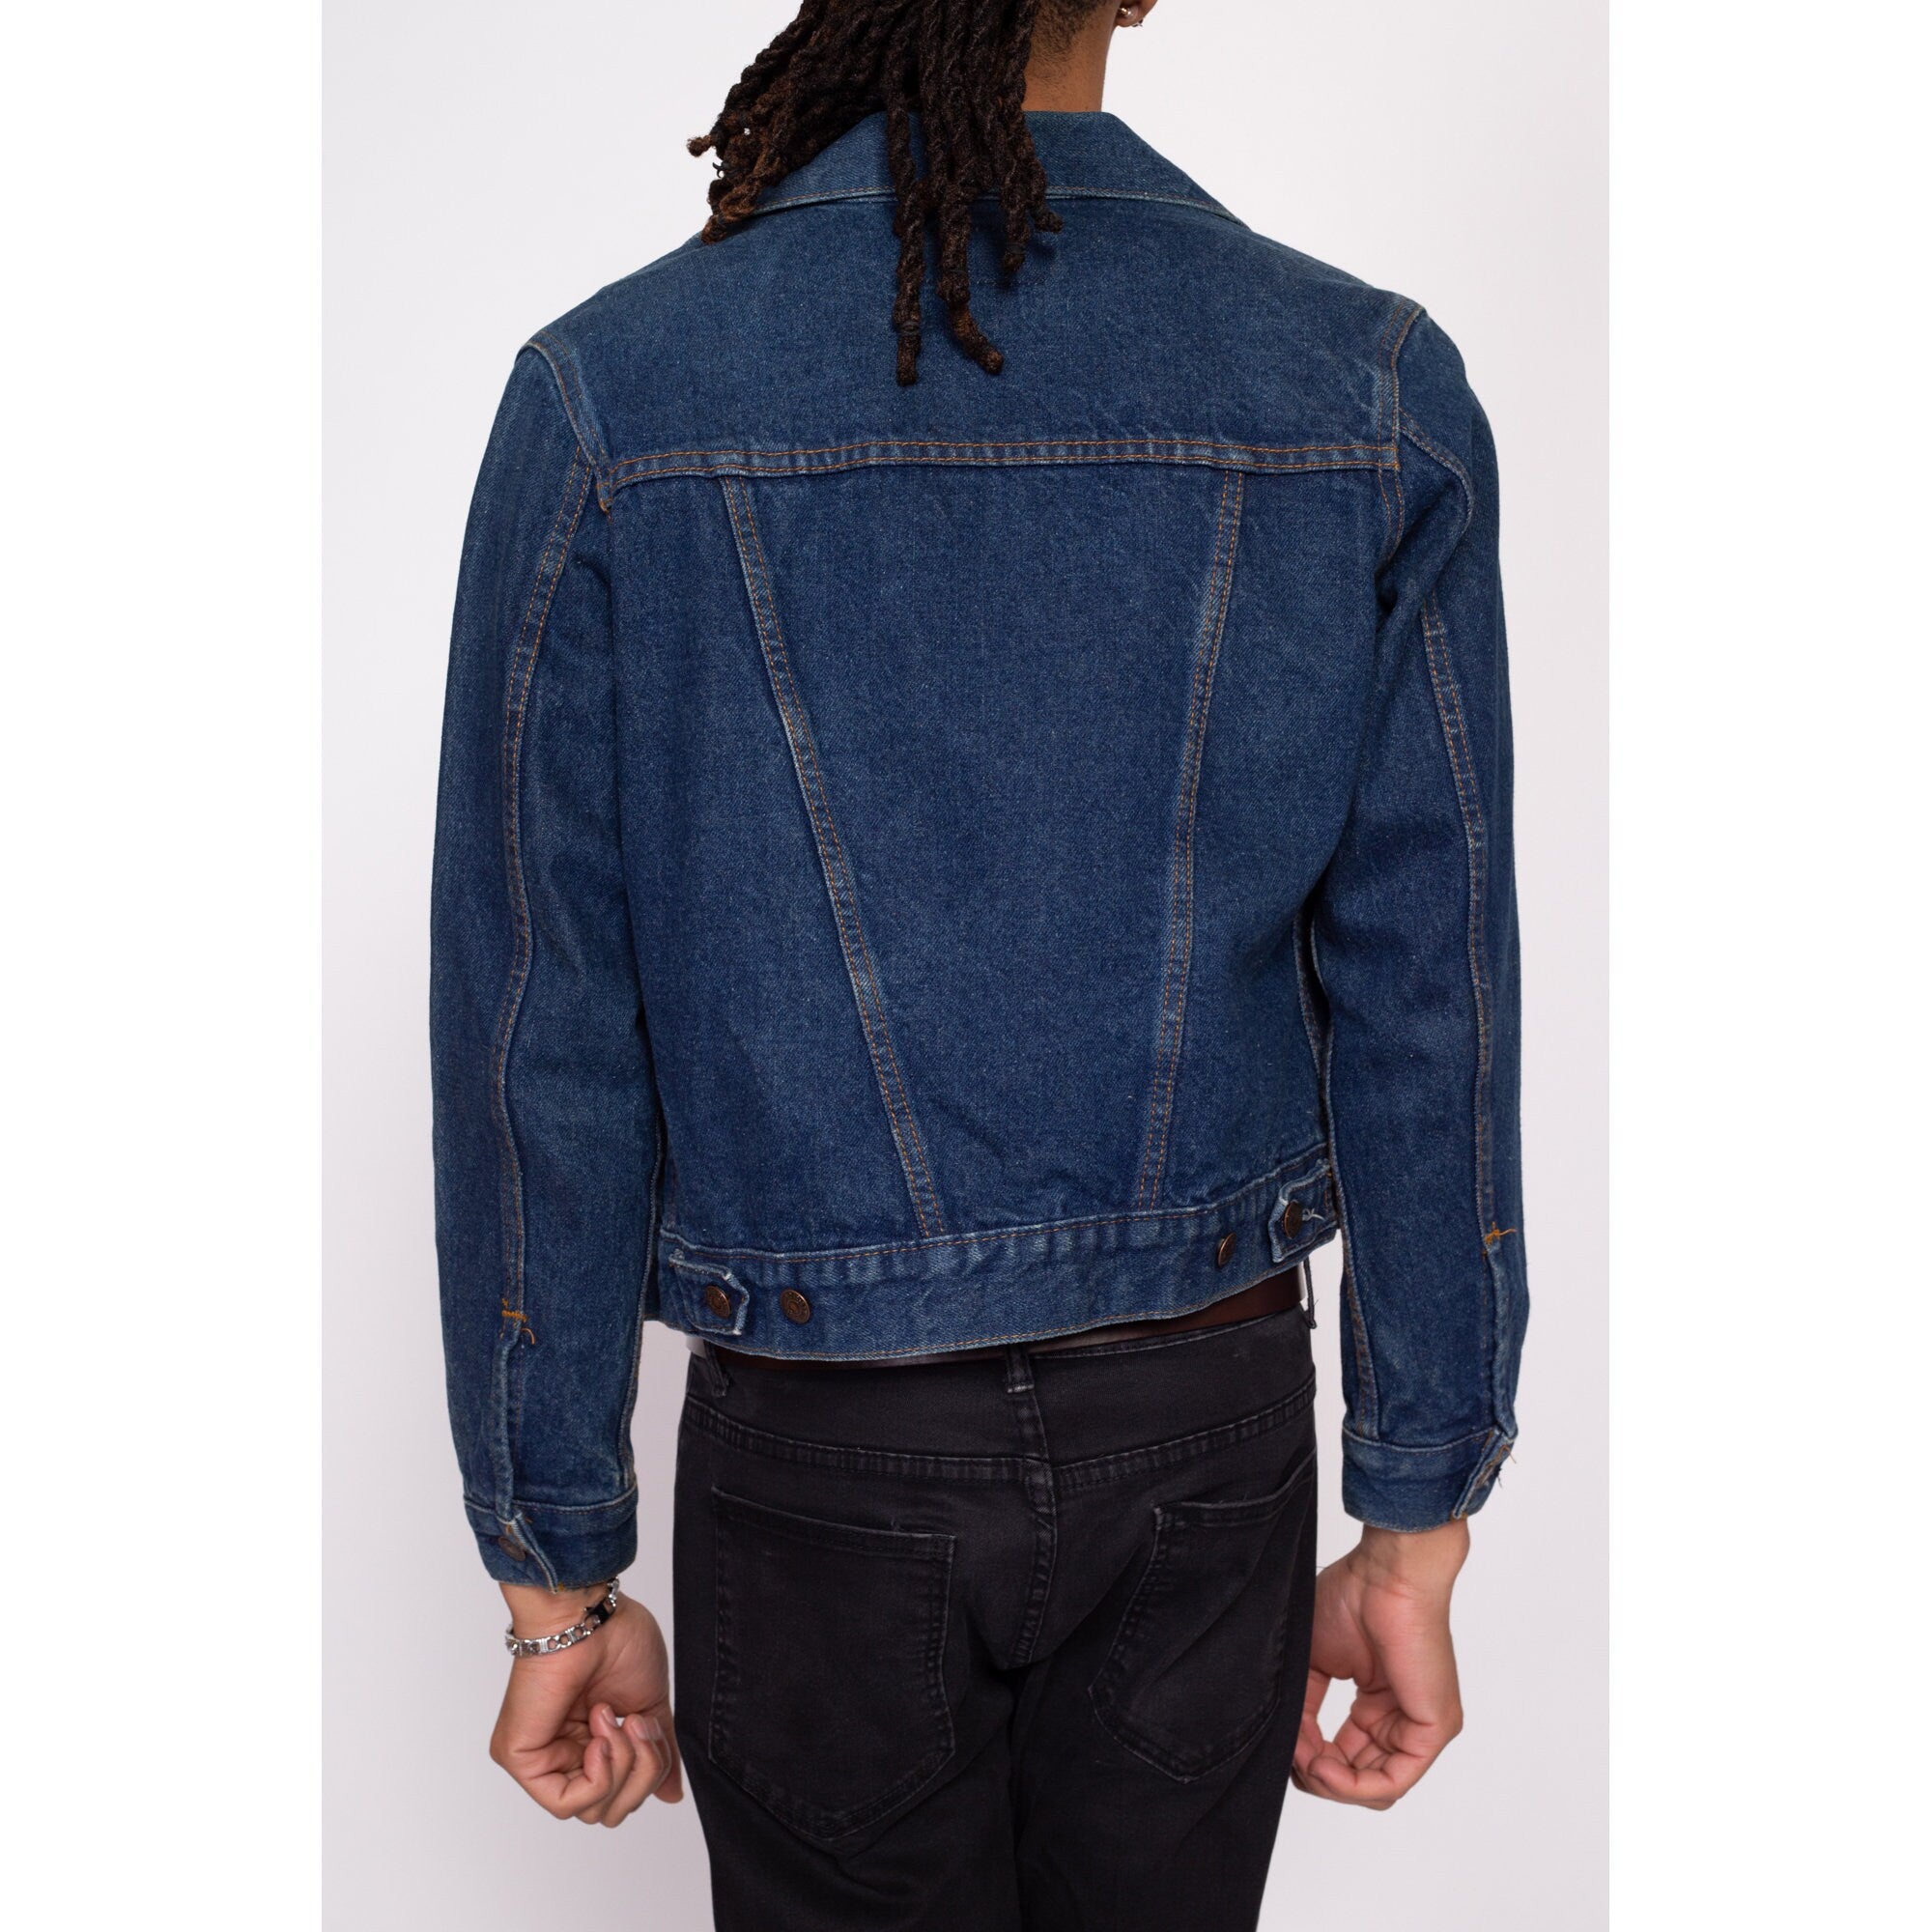 Leonardo DiCaprio in a TOM FORD denim jacket, t-shirt and denim jeans at  the 'Once Upon a Time in Ho… | Leonardo dicaprio, Lined denim jacket,  Oversized denim shirt